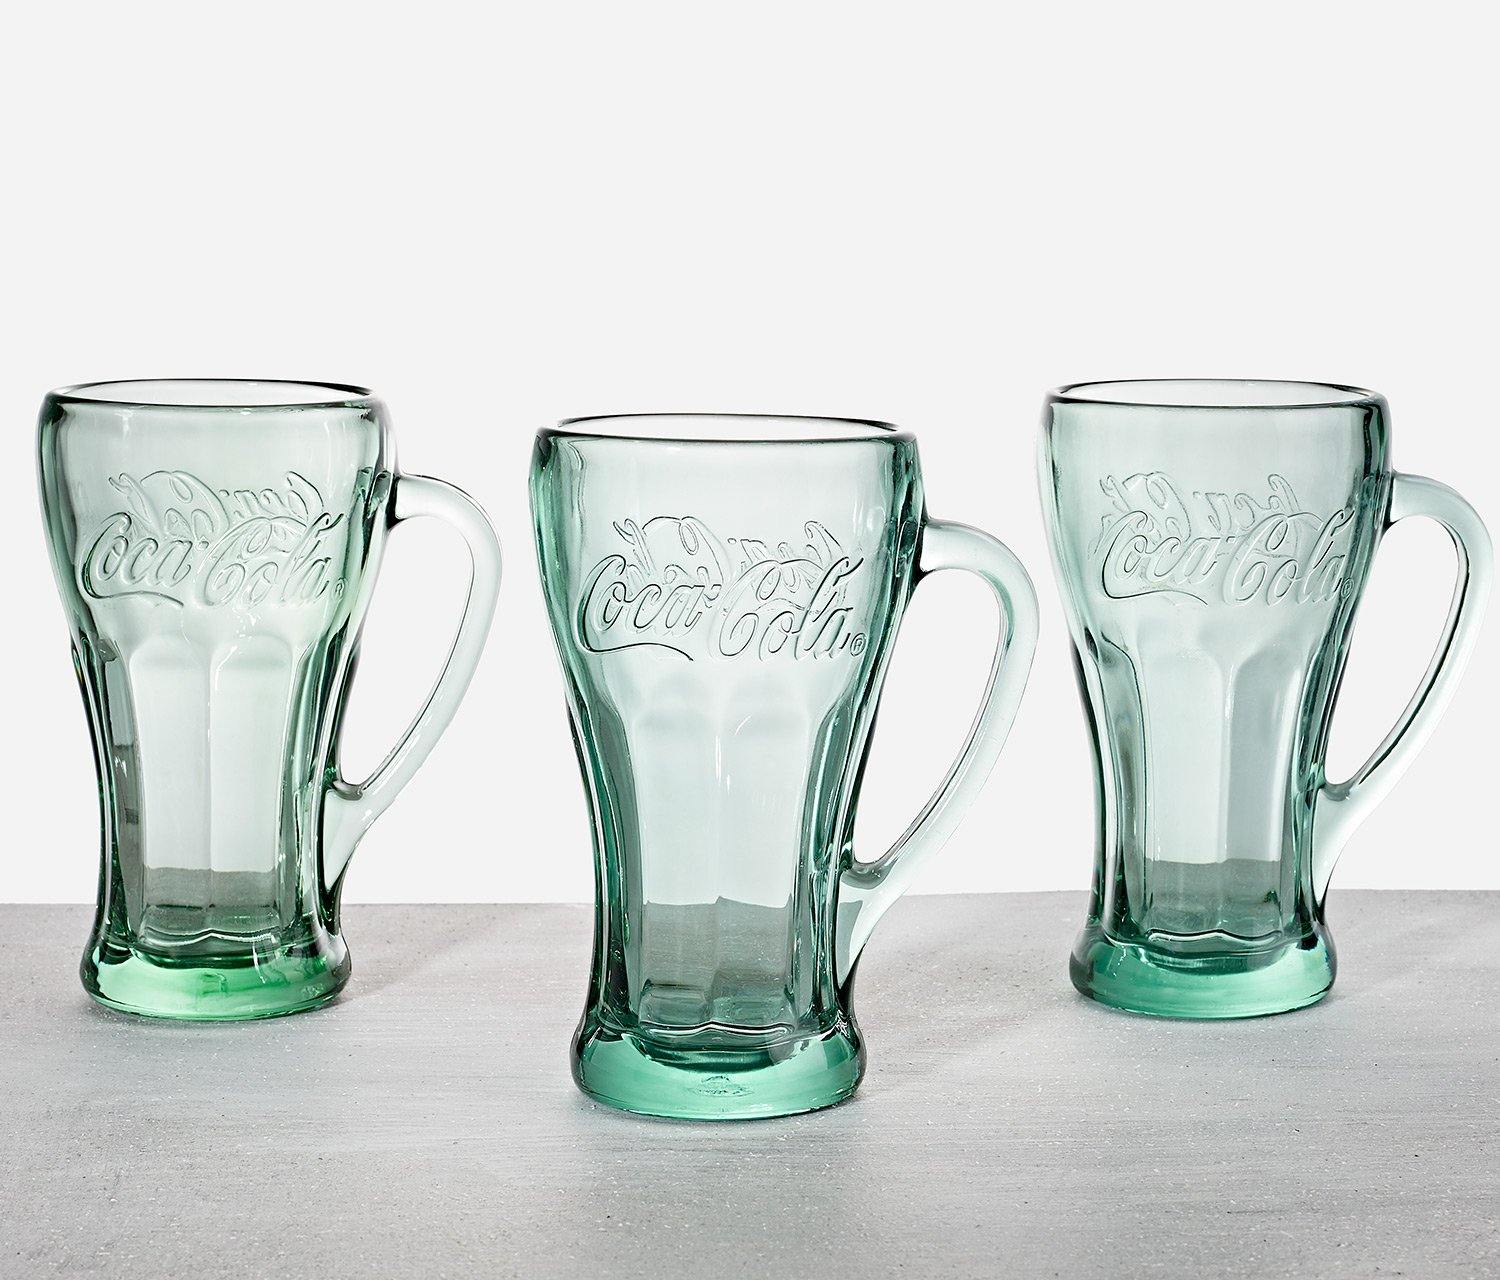 Vintage Sets of Collectors Coke Glasses, Coca Cola Glasses, Butterfly and  Bottle Cap Glasses in Different Colors -  Israel